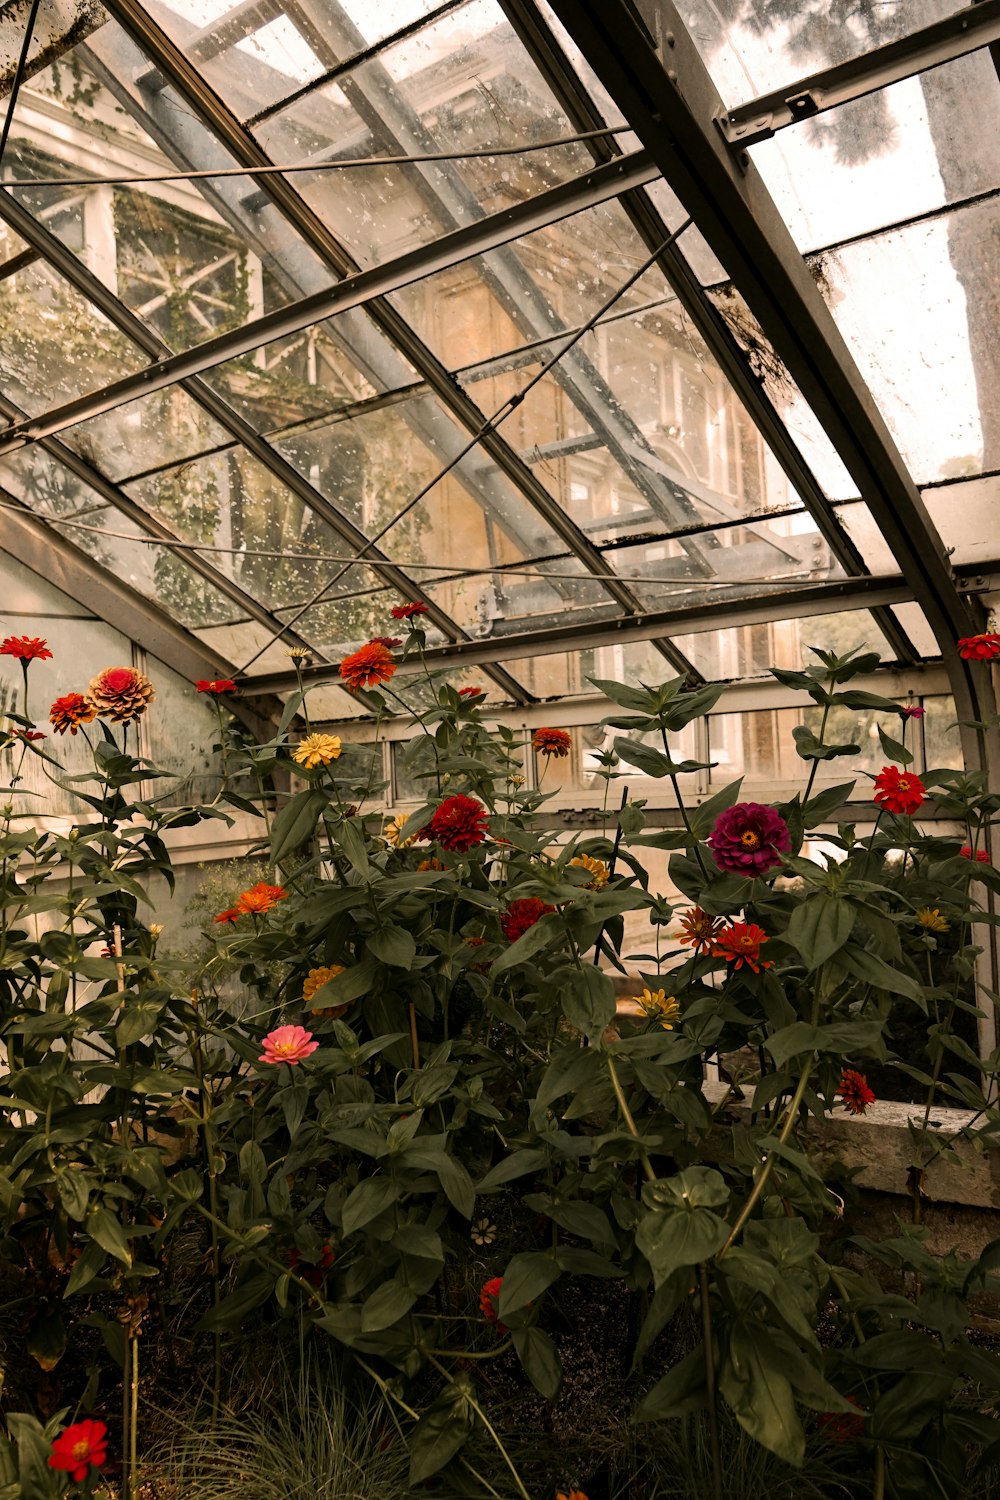 a large greenhouse with many plants